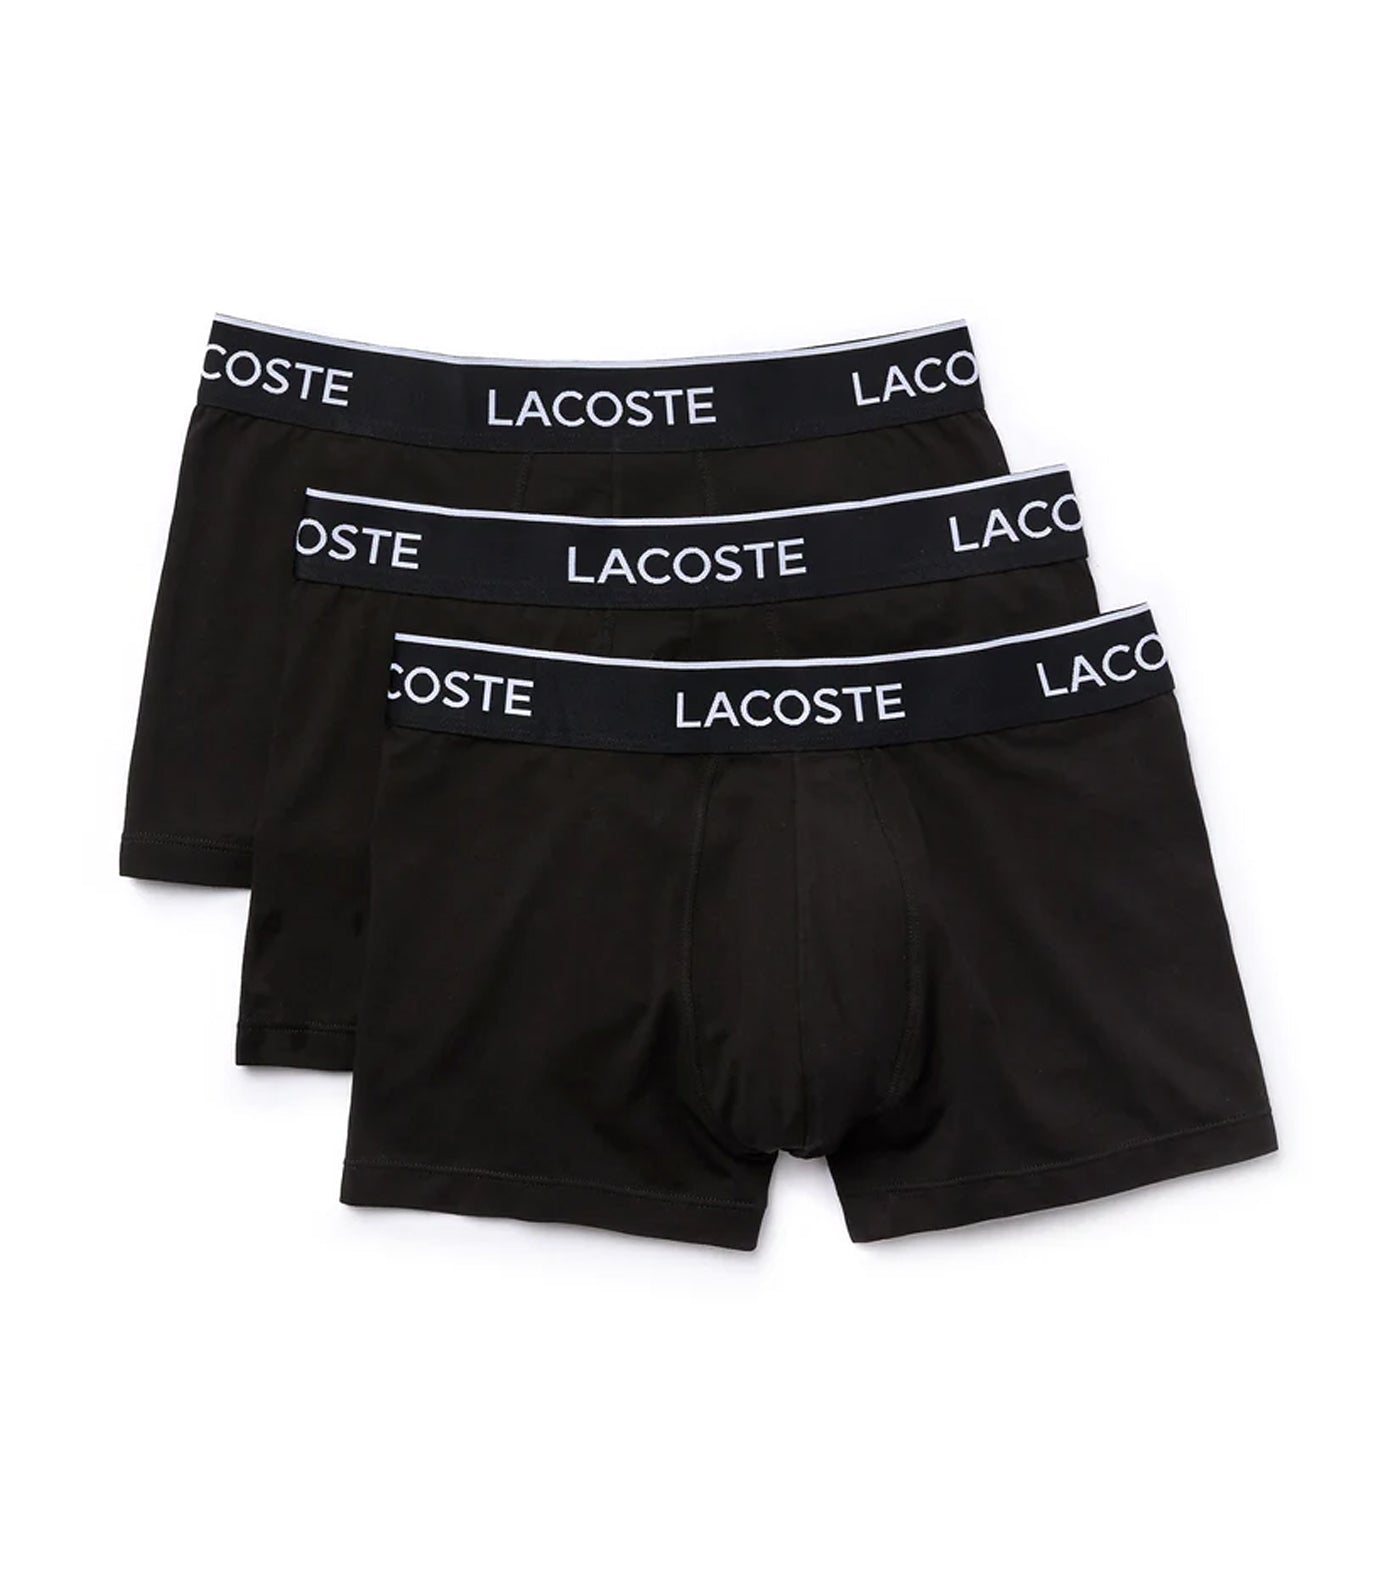 Lacoste Pack of 3 Casual Black Boxer Briefs Black